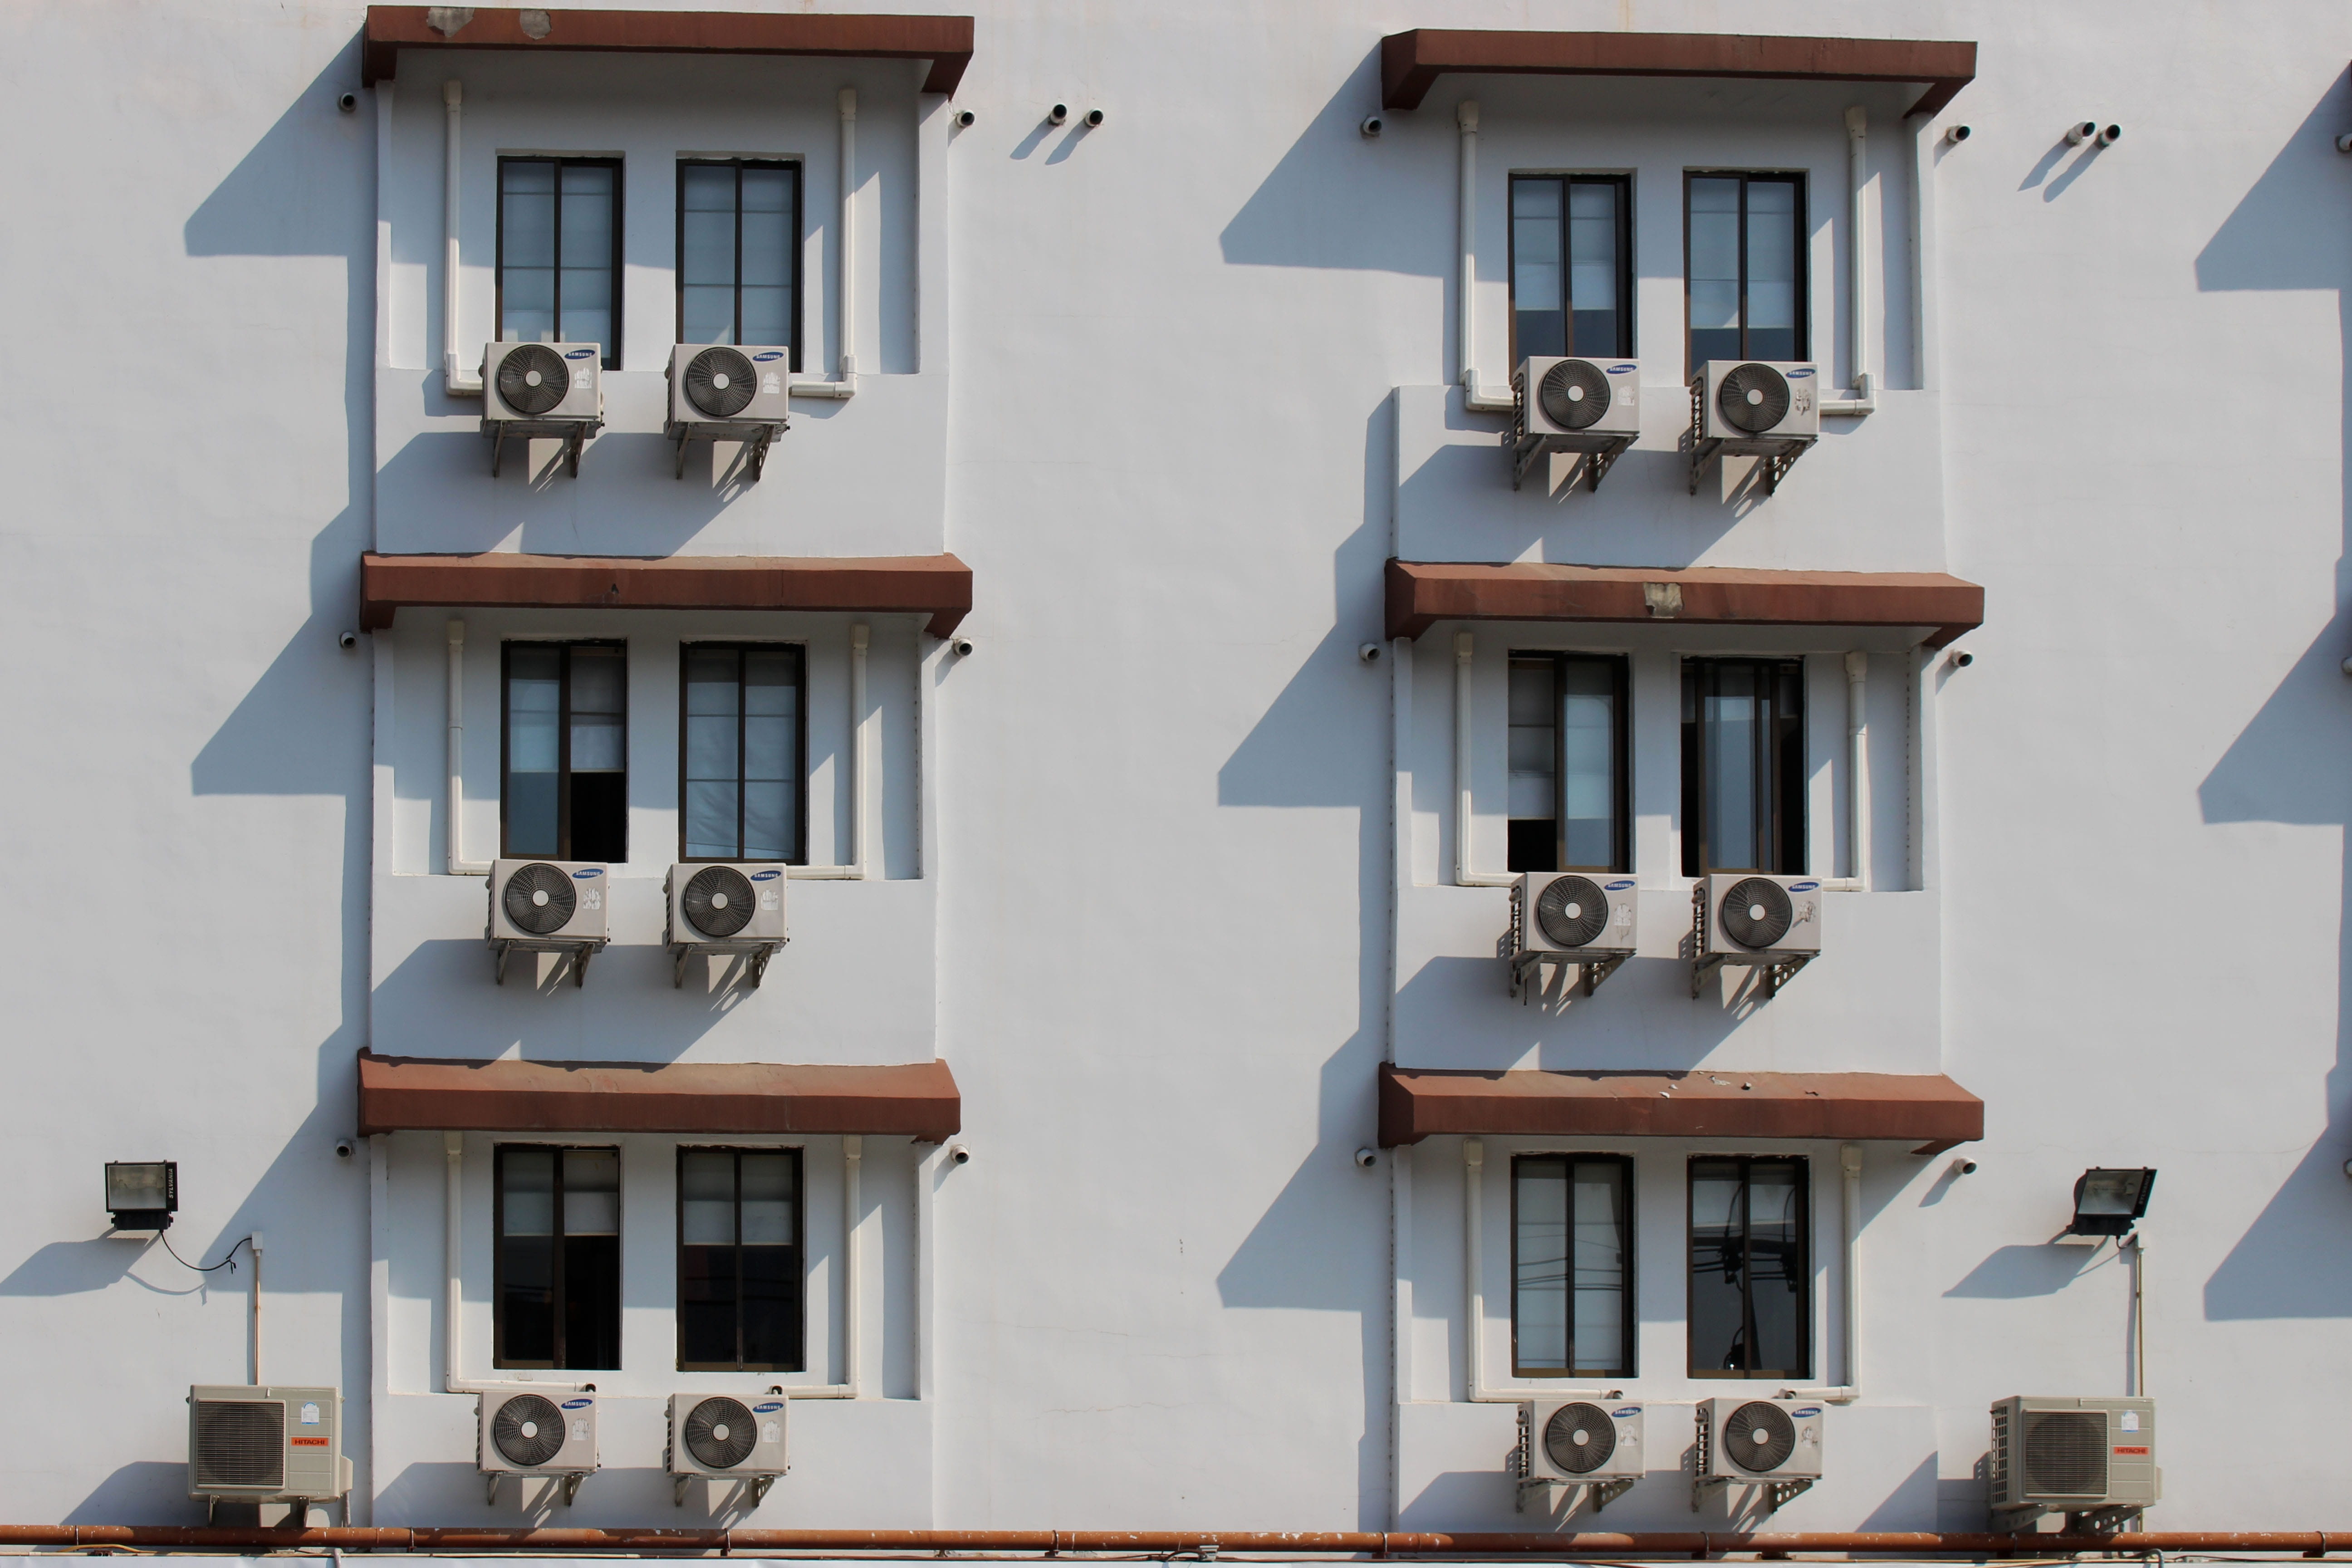 white wall paint 3-storey building, Air Conditioner, Hotel, Air, Conditioner